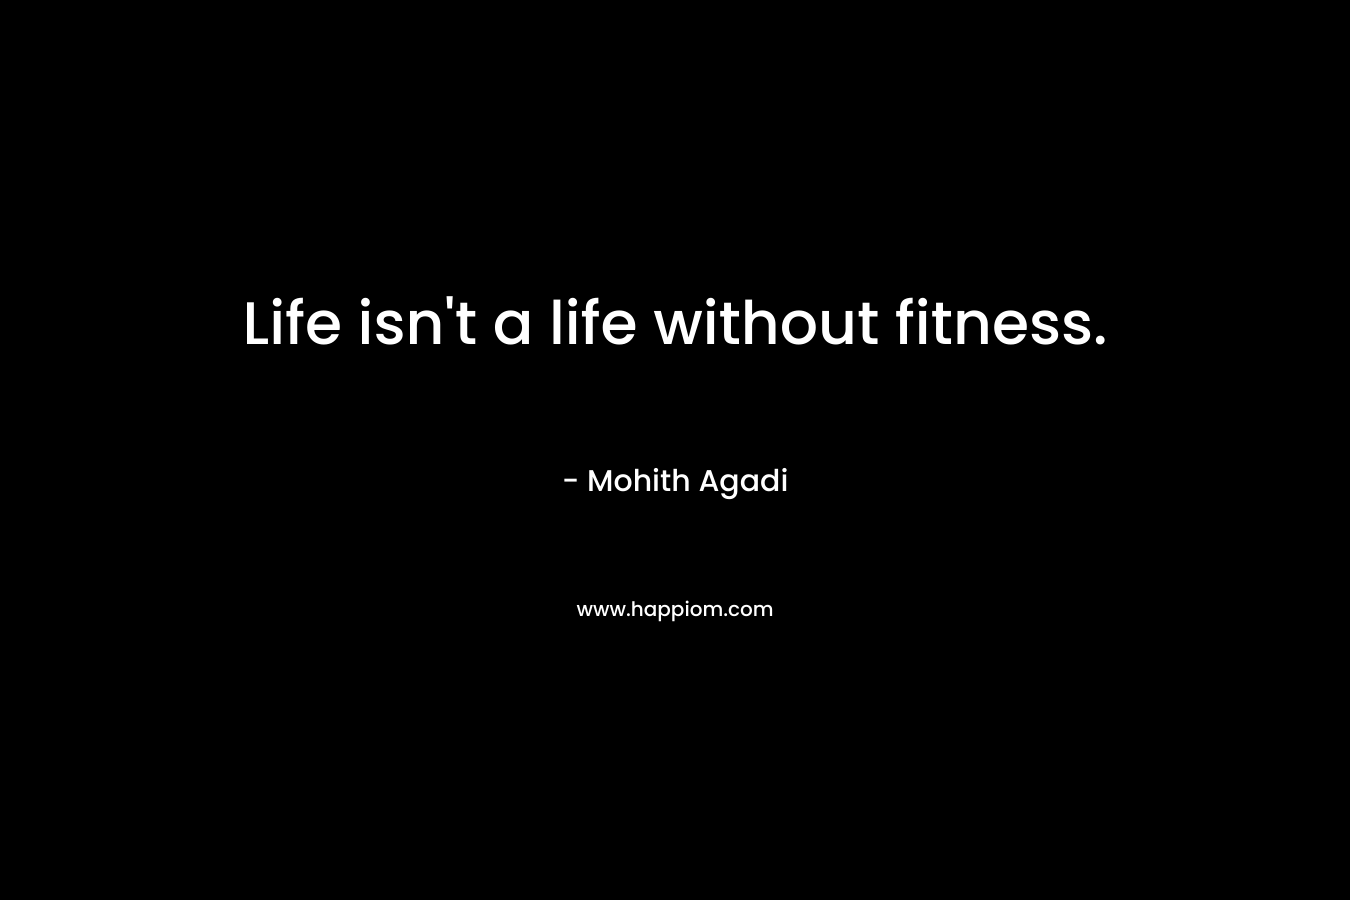 Life isn't a life without fitness.